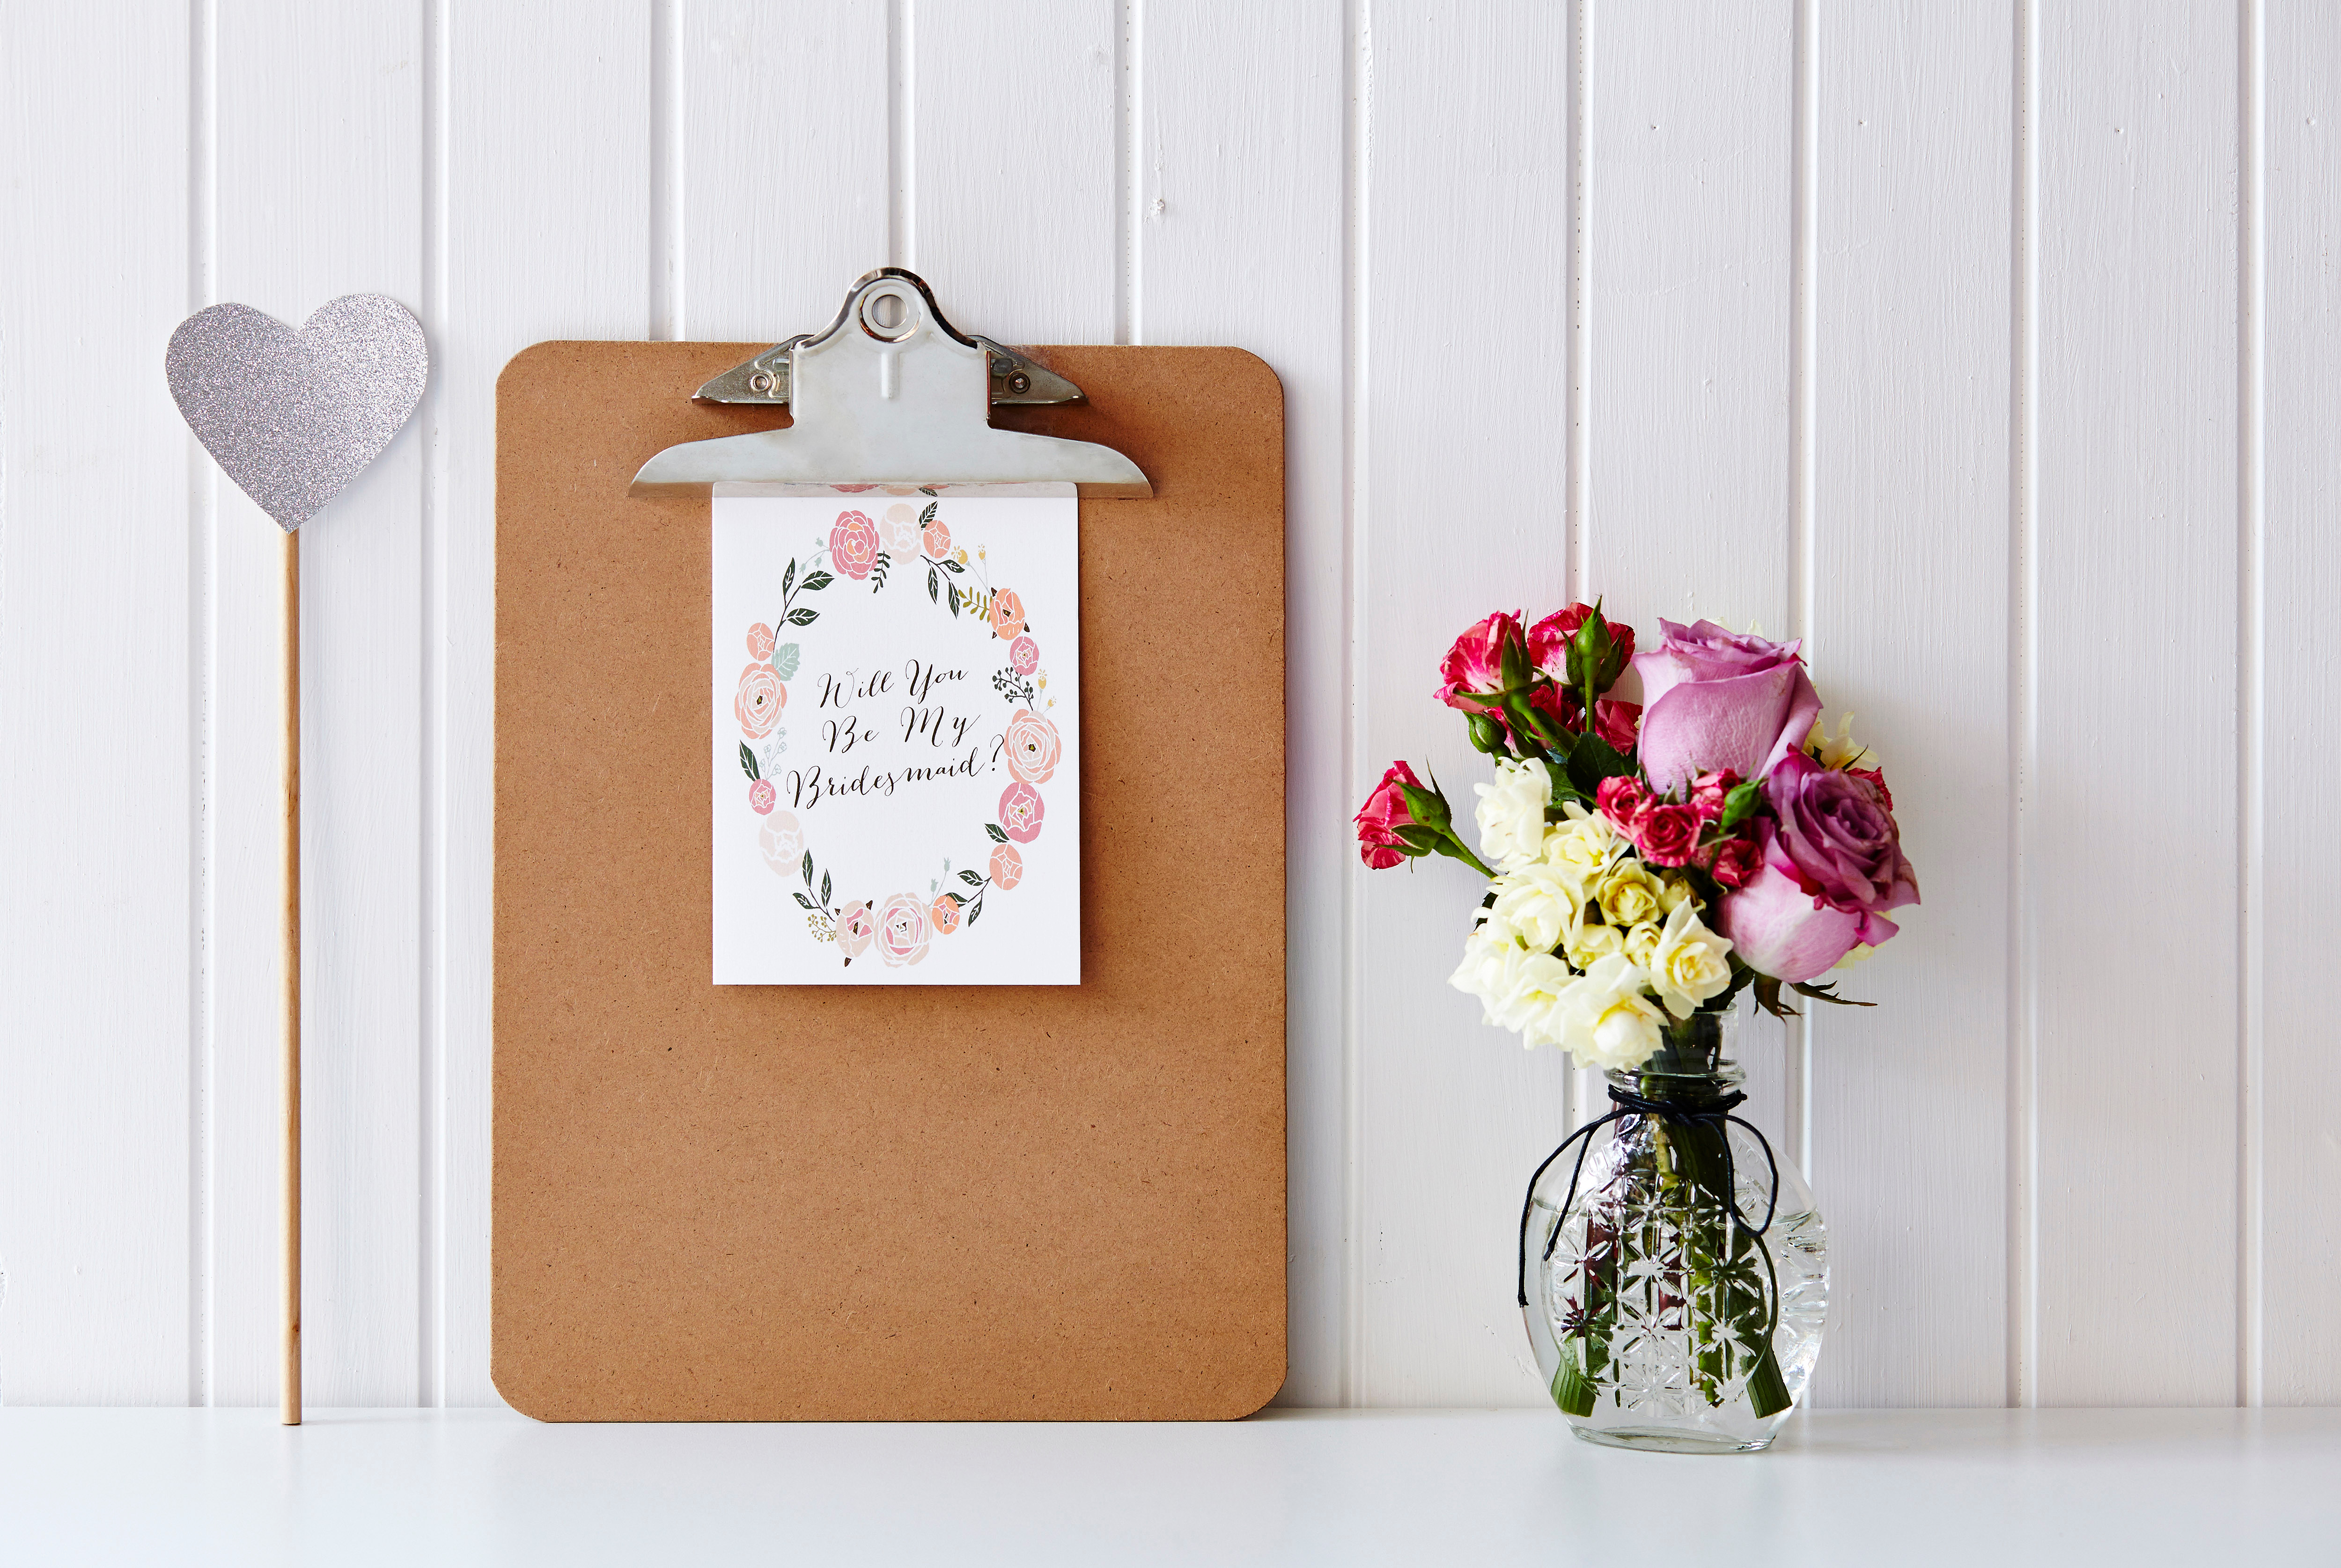 A clipboard containing a bridesmaid card | Source: Shutterstock